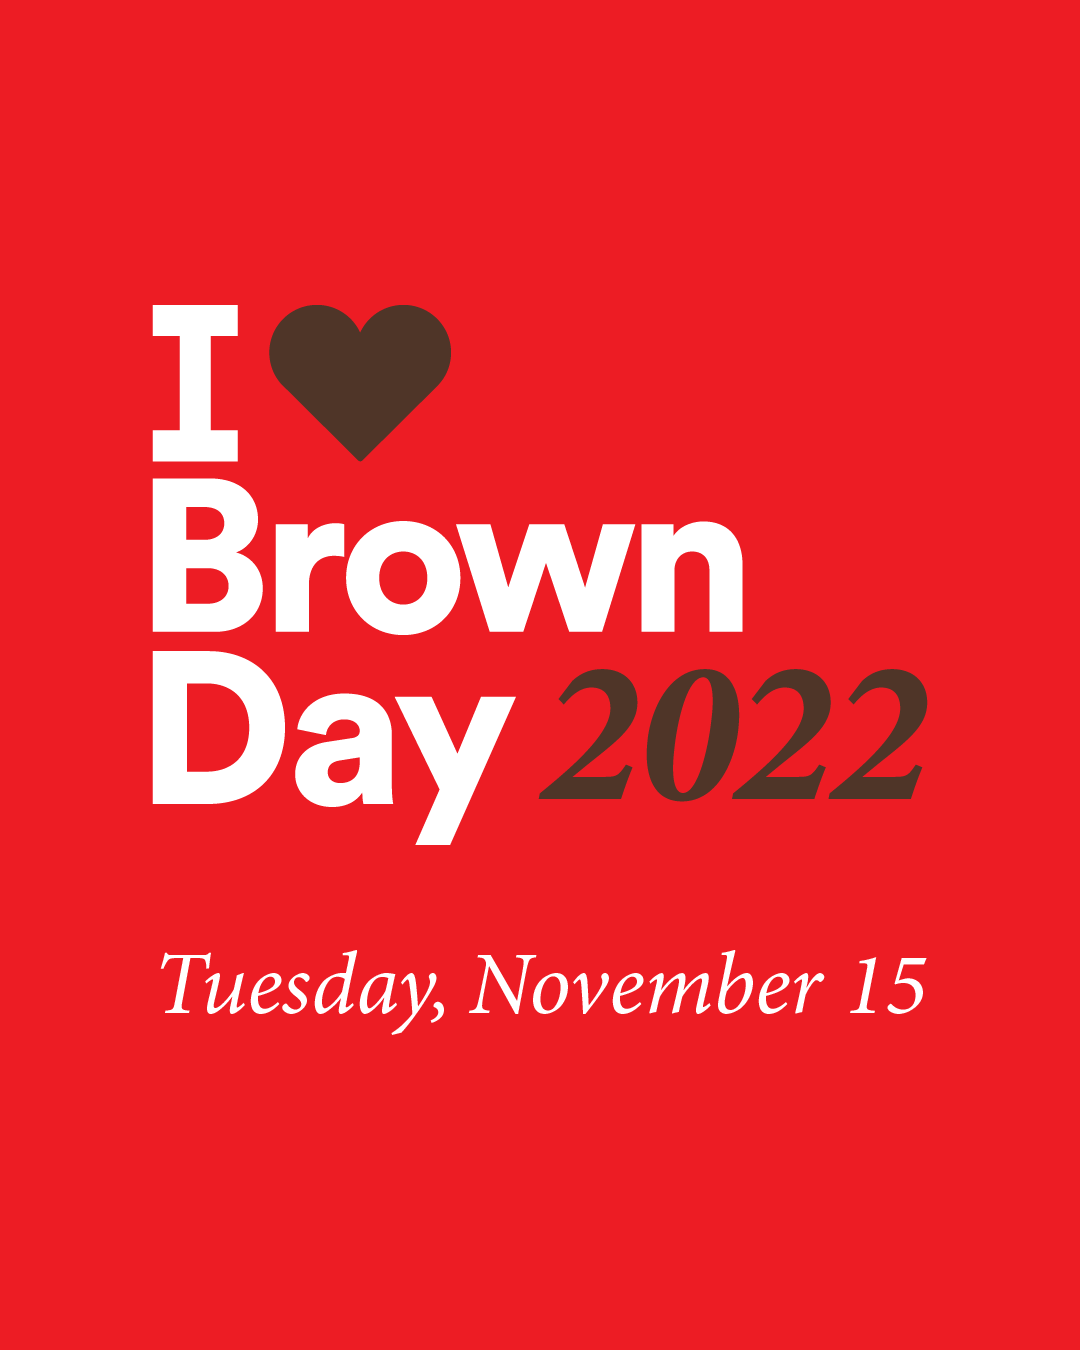 I Heart Brown Day logo in white and brown on a red background, with text reading November 15 below